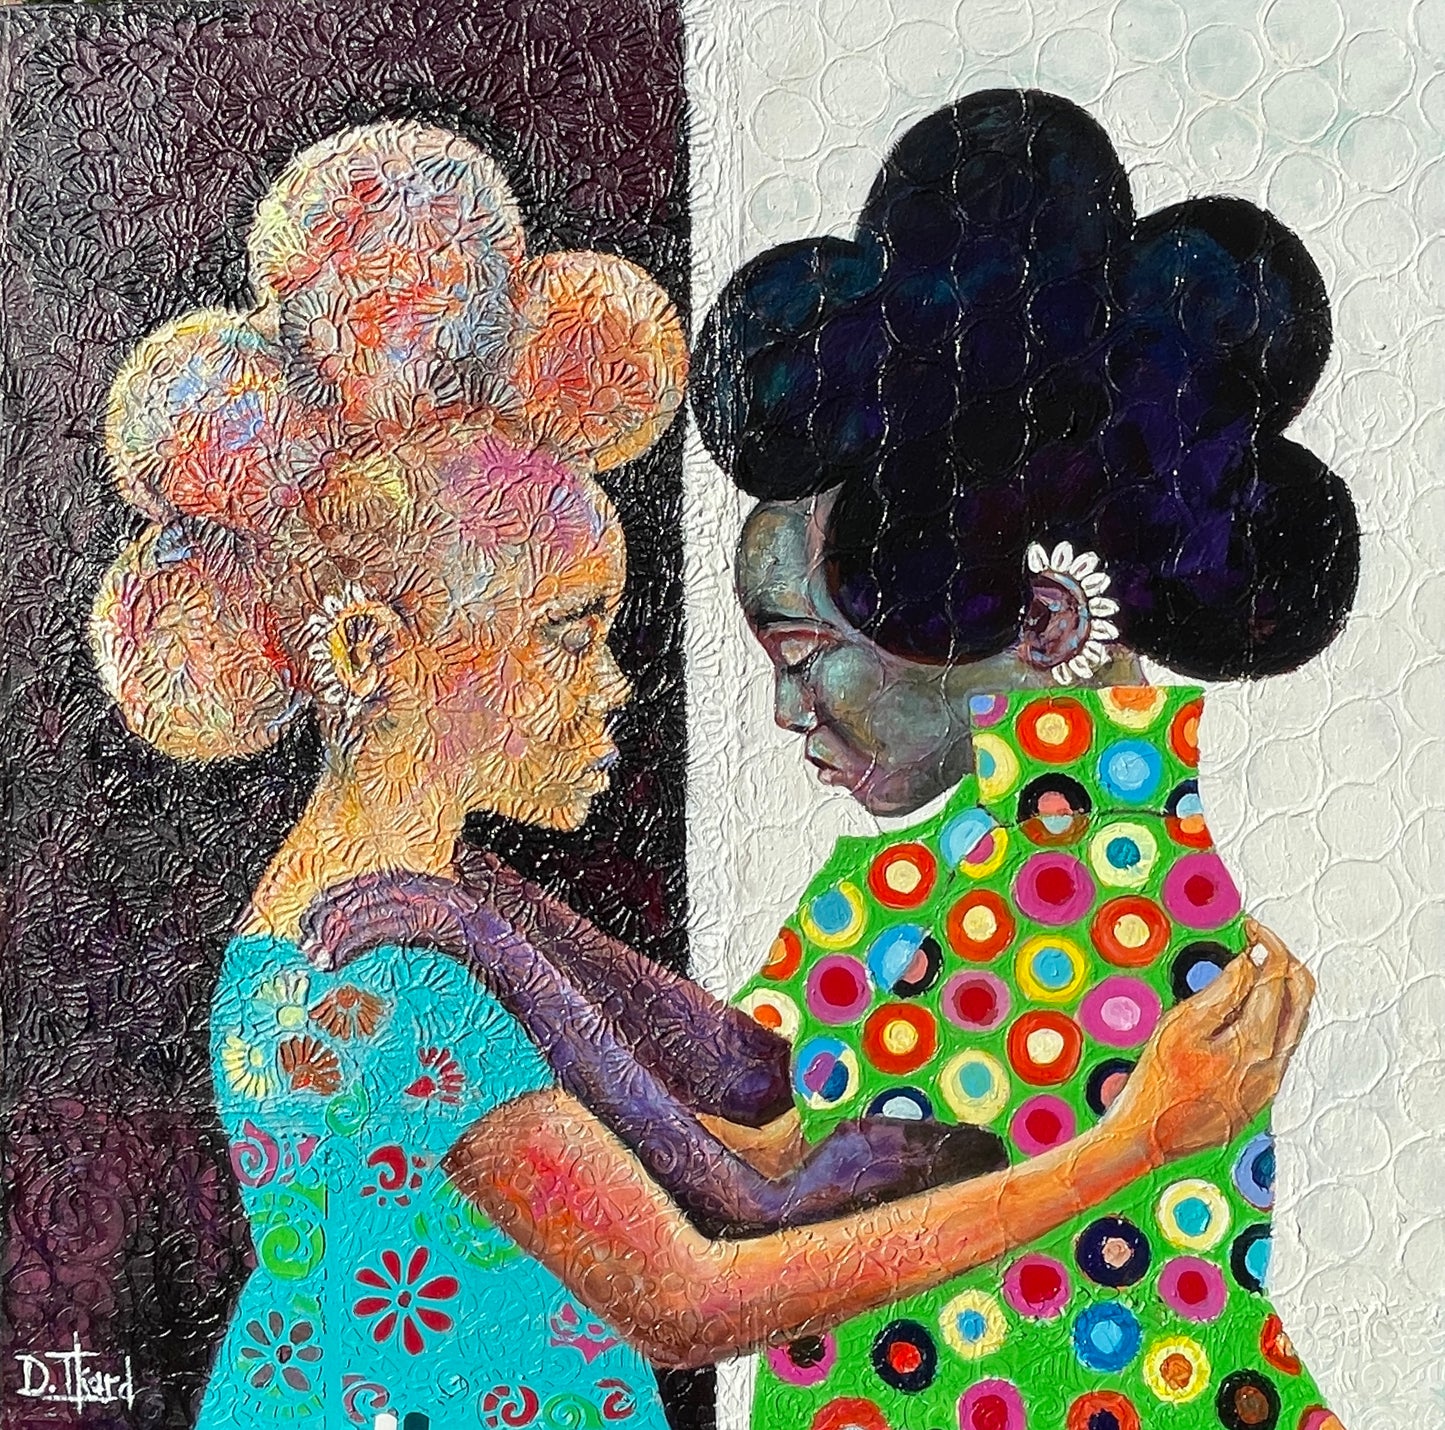 “We,She,Her”, 16x16, Giclee print on canvas Limited Edition of 50